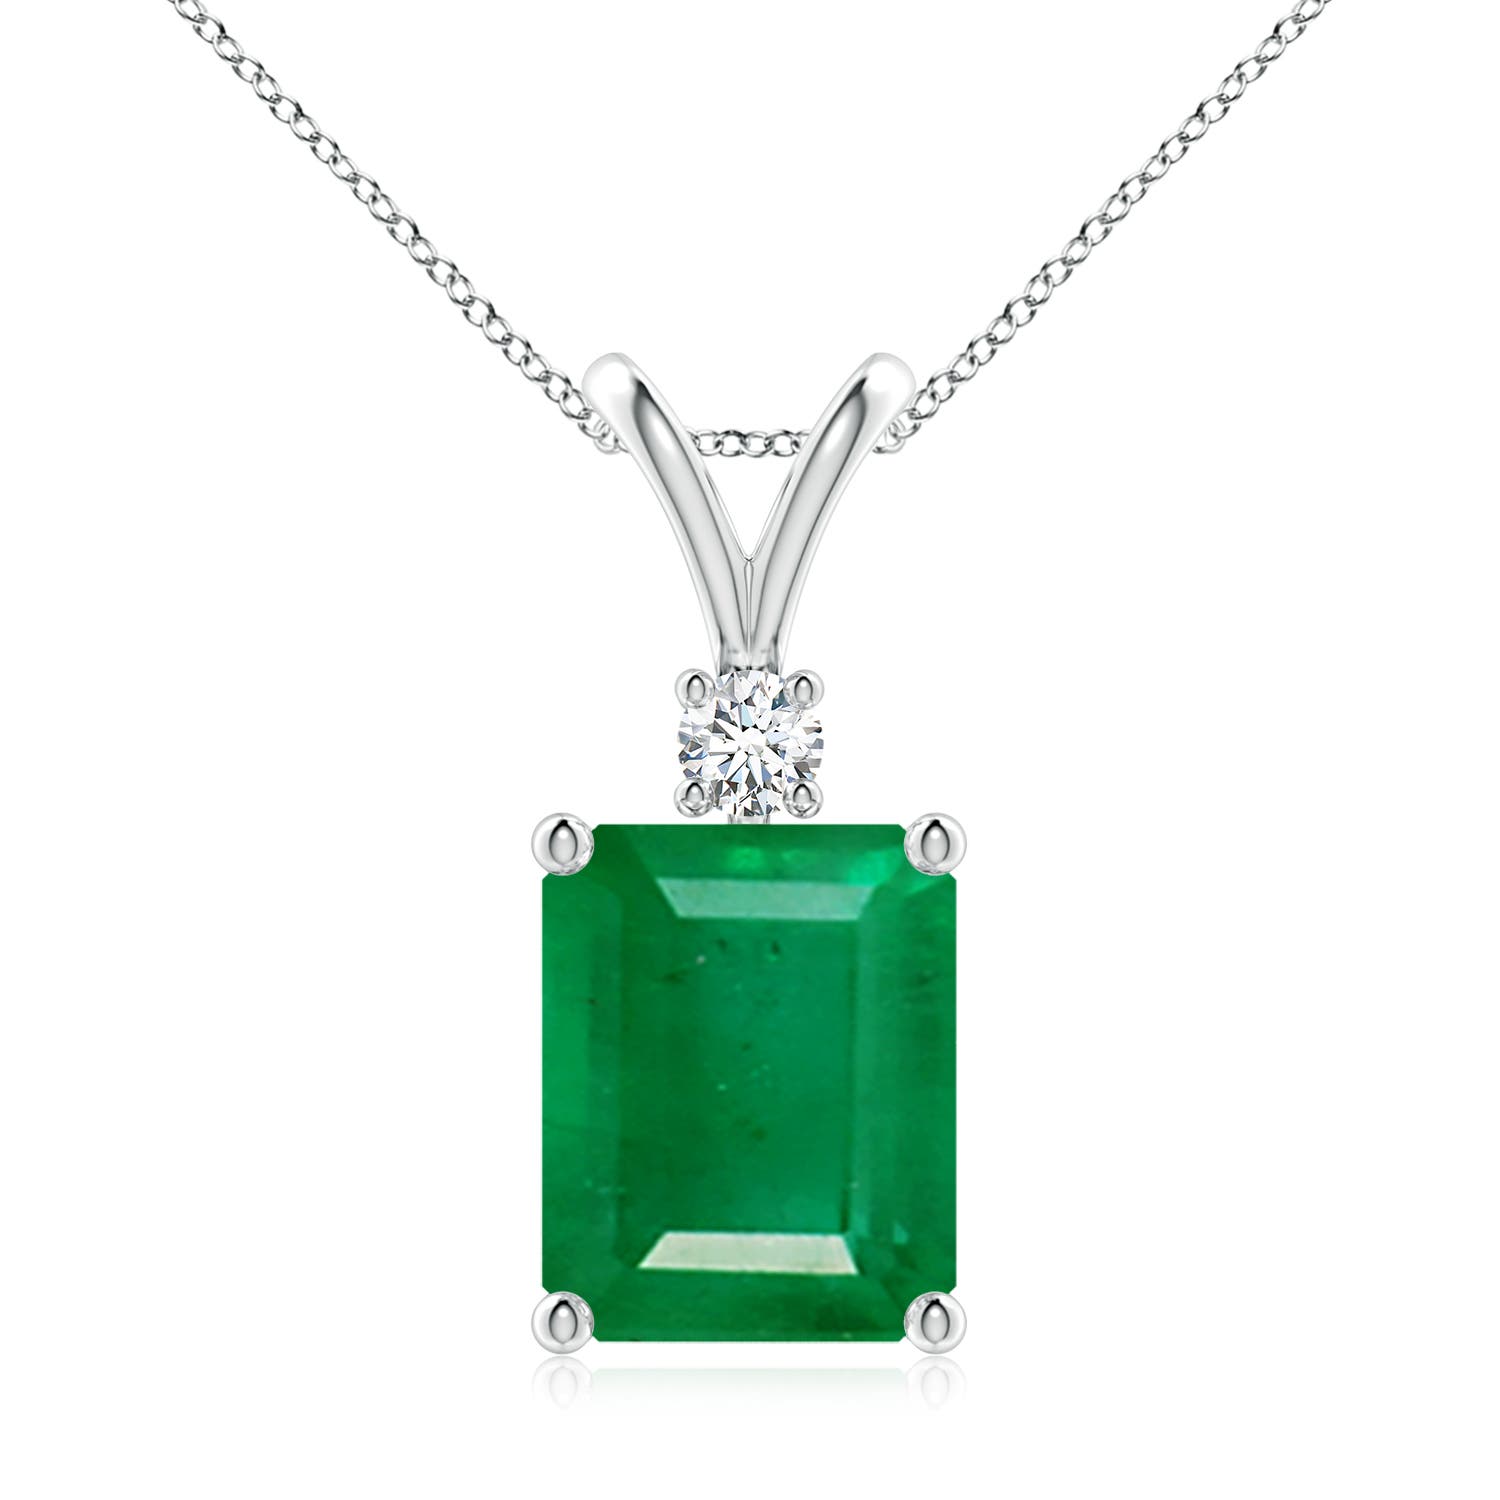 AA - Emerald / 2.96 CT / 14 KT White Gold